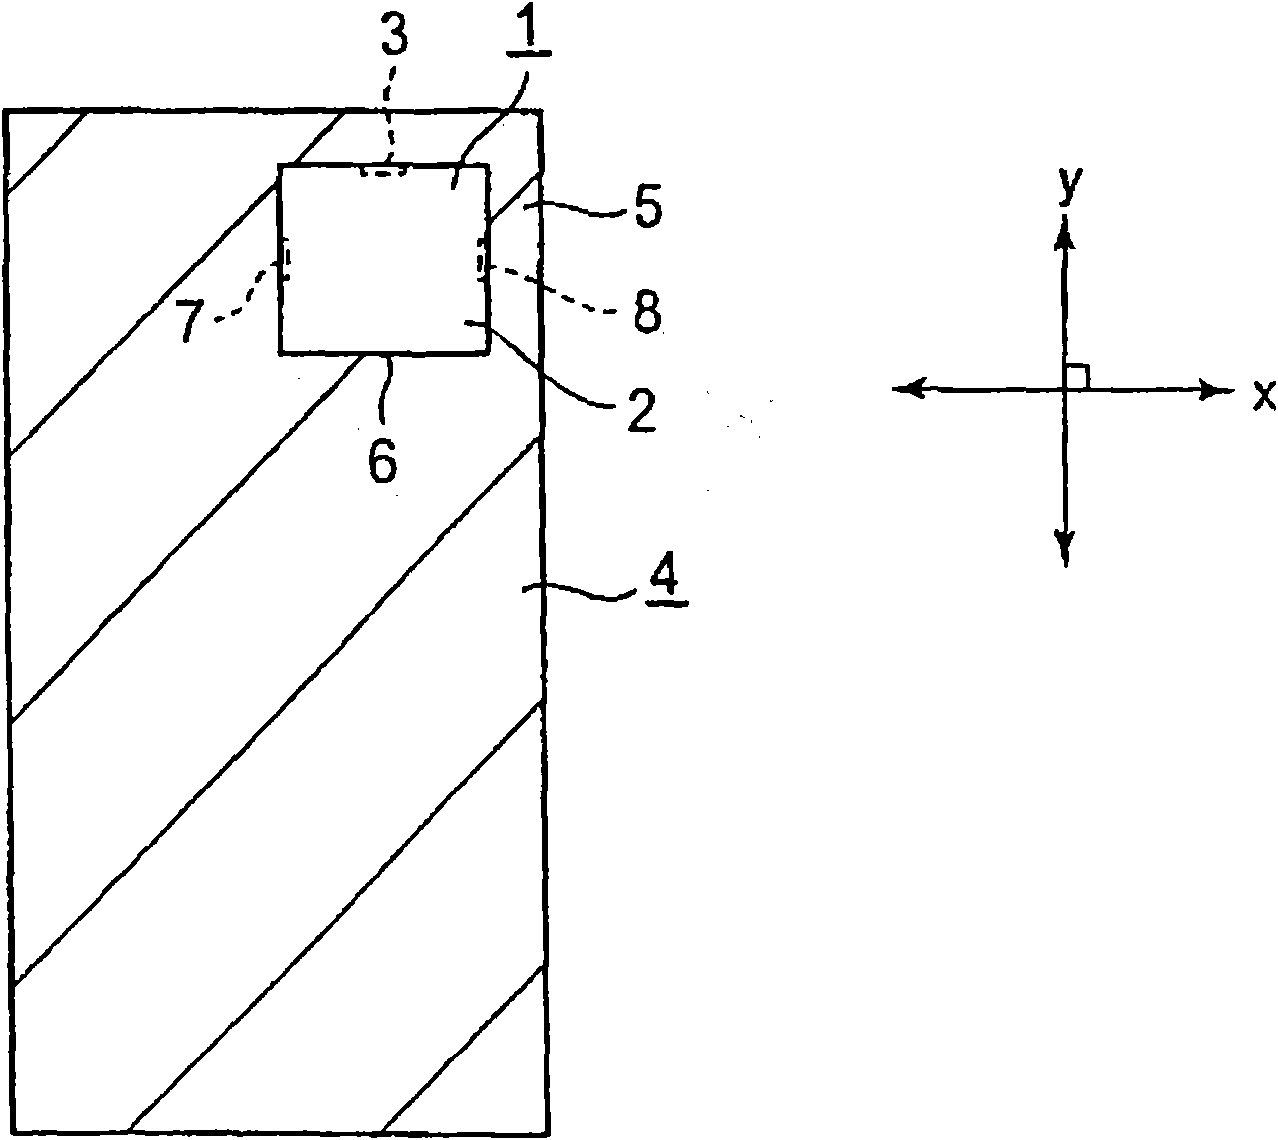 Antenna and communication device with that antenna